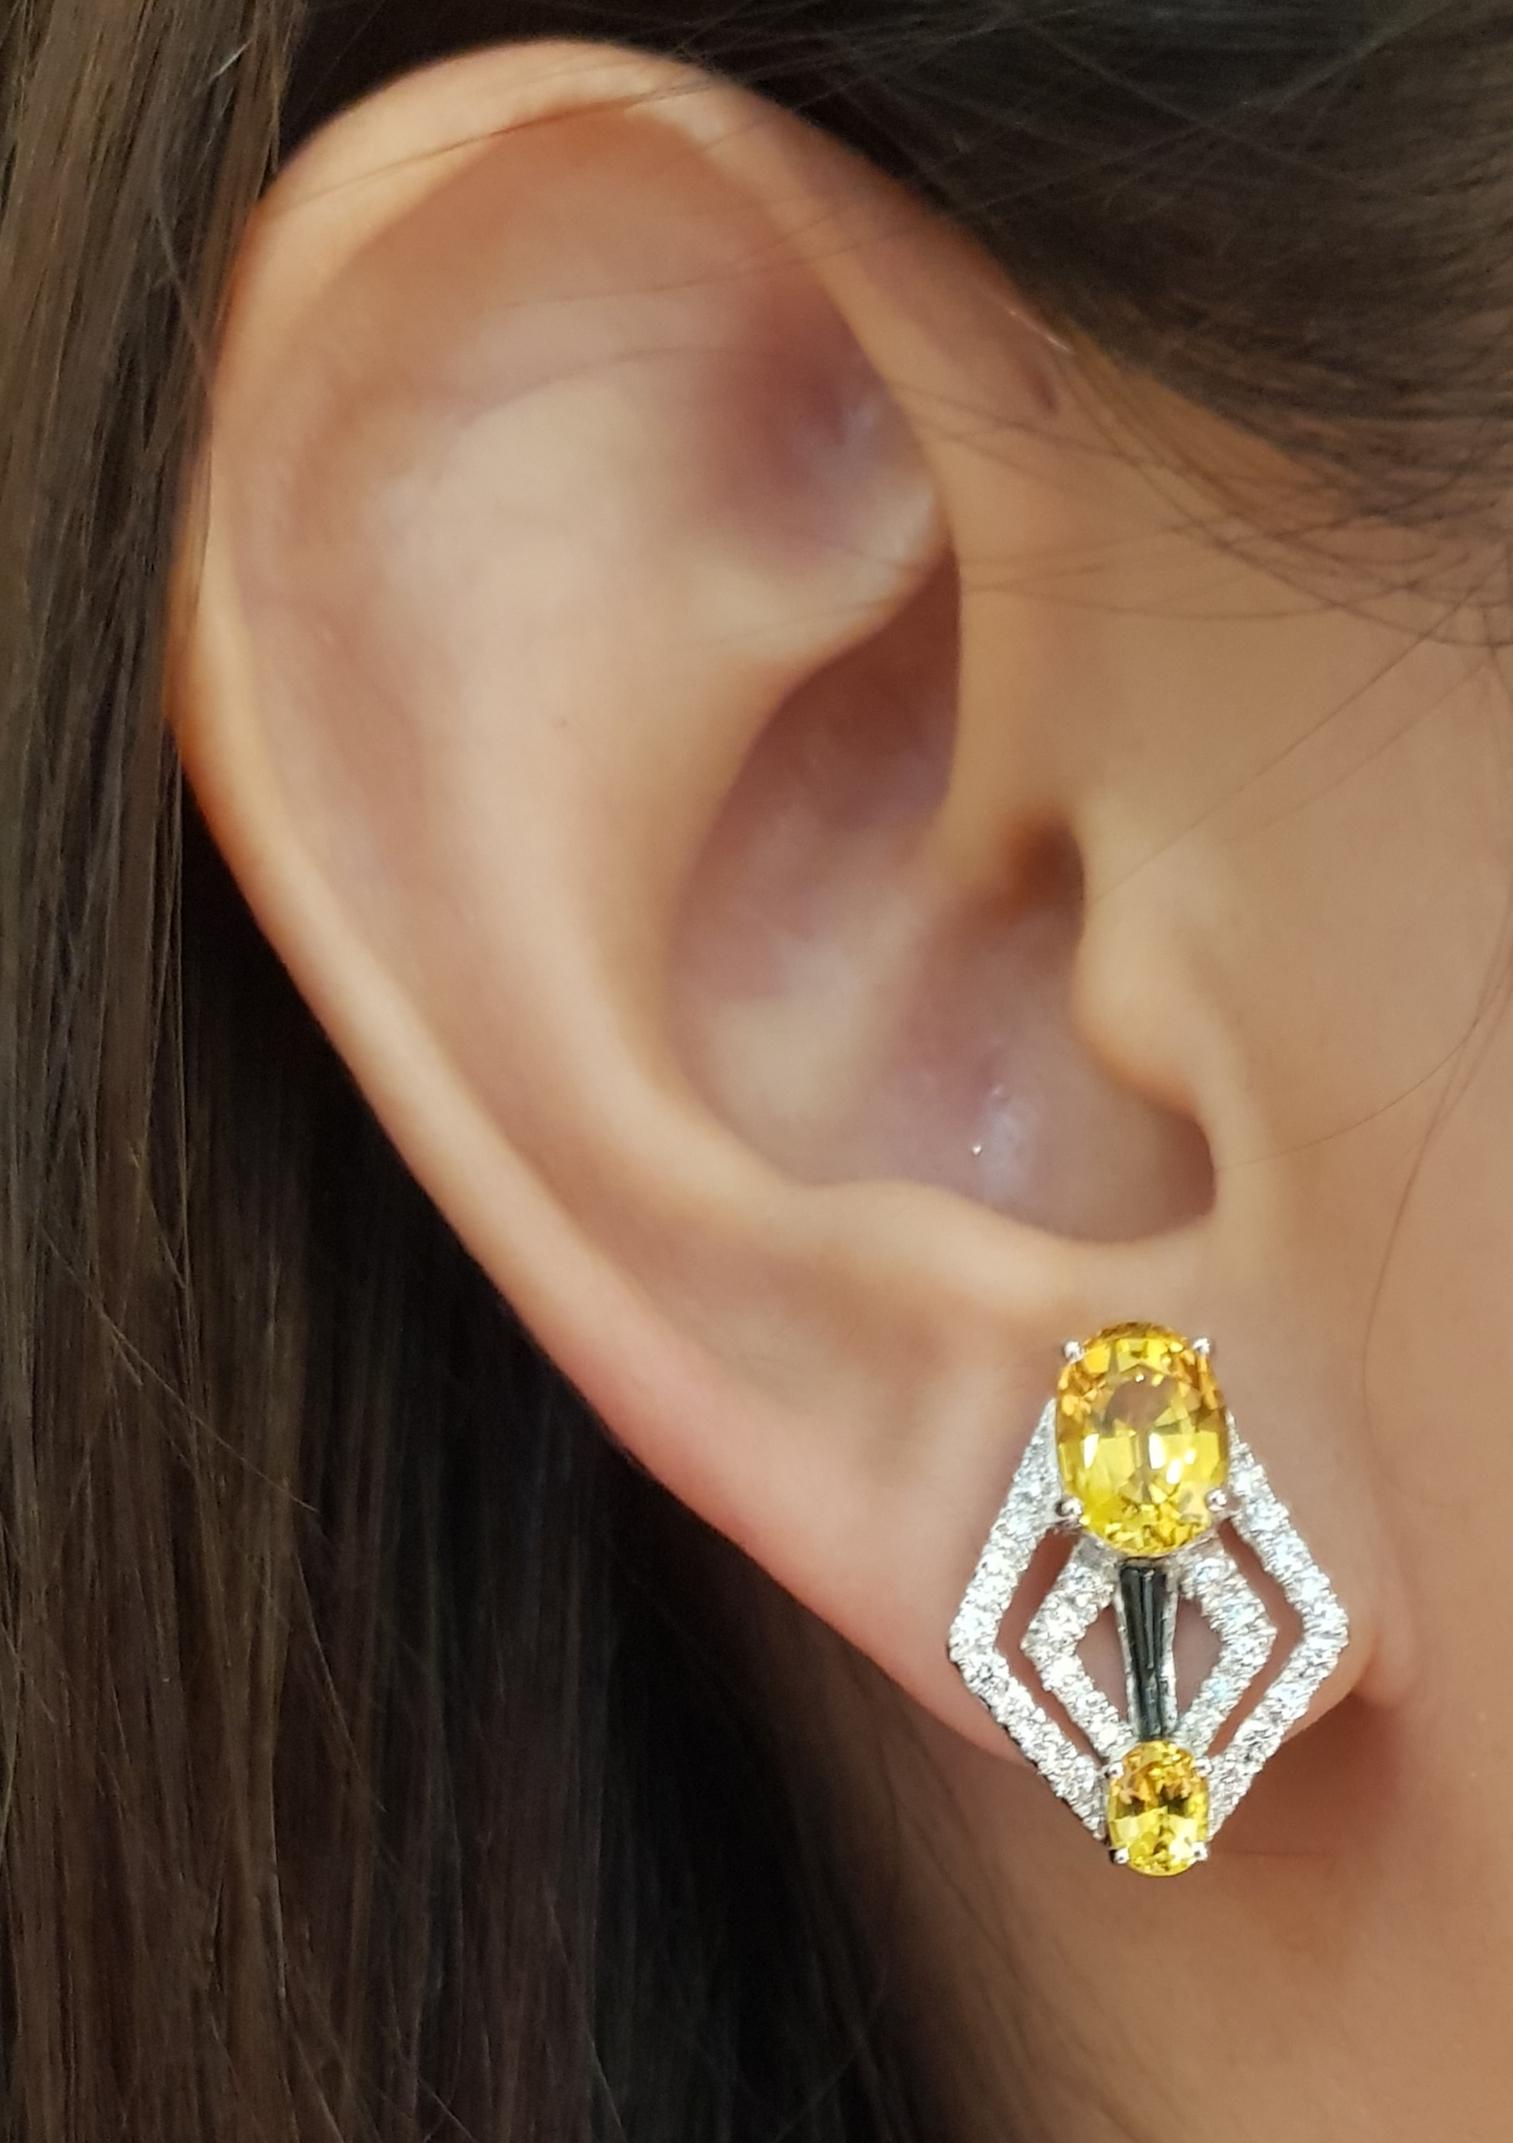 Yellow Sapphire 4.80 carats with Diamond 0.52 carat Earrings set in 18 Karat White Gold Settings

Width:  1.3 cm 
Length:  2.0 cm
Total Weight: 9.08 grams

